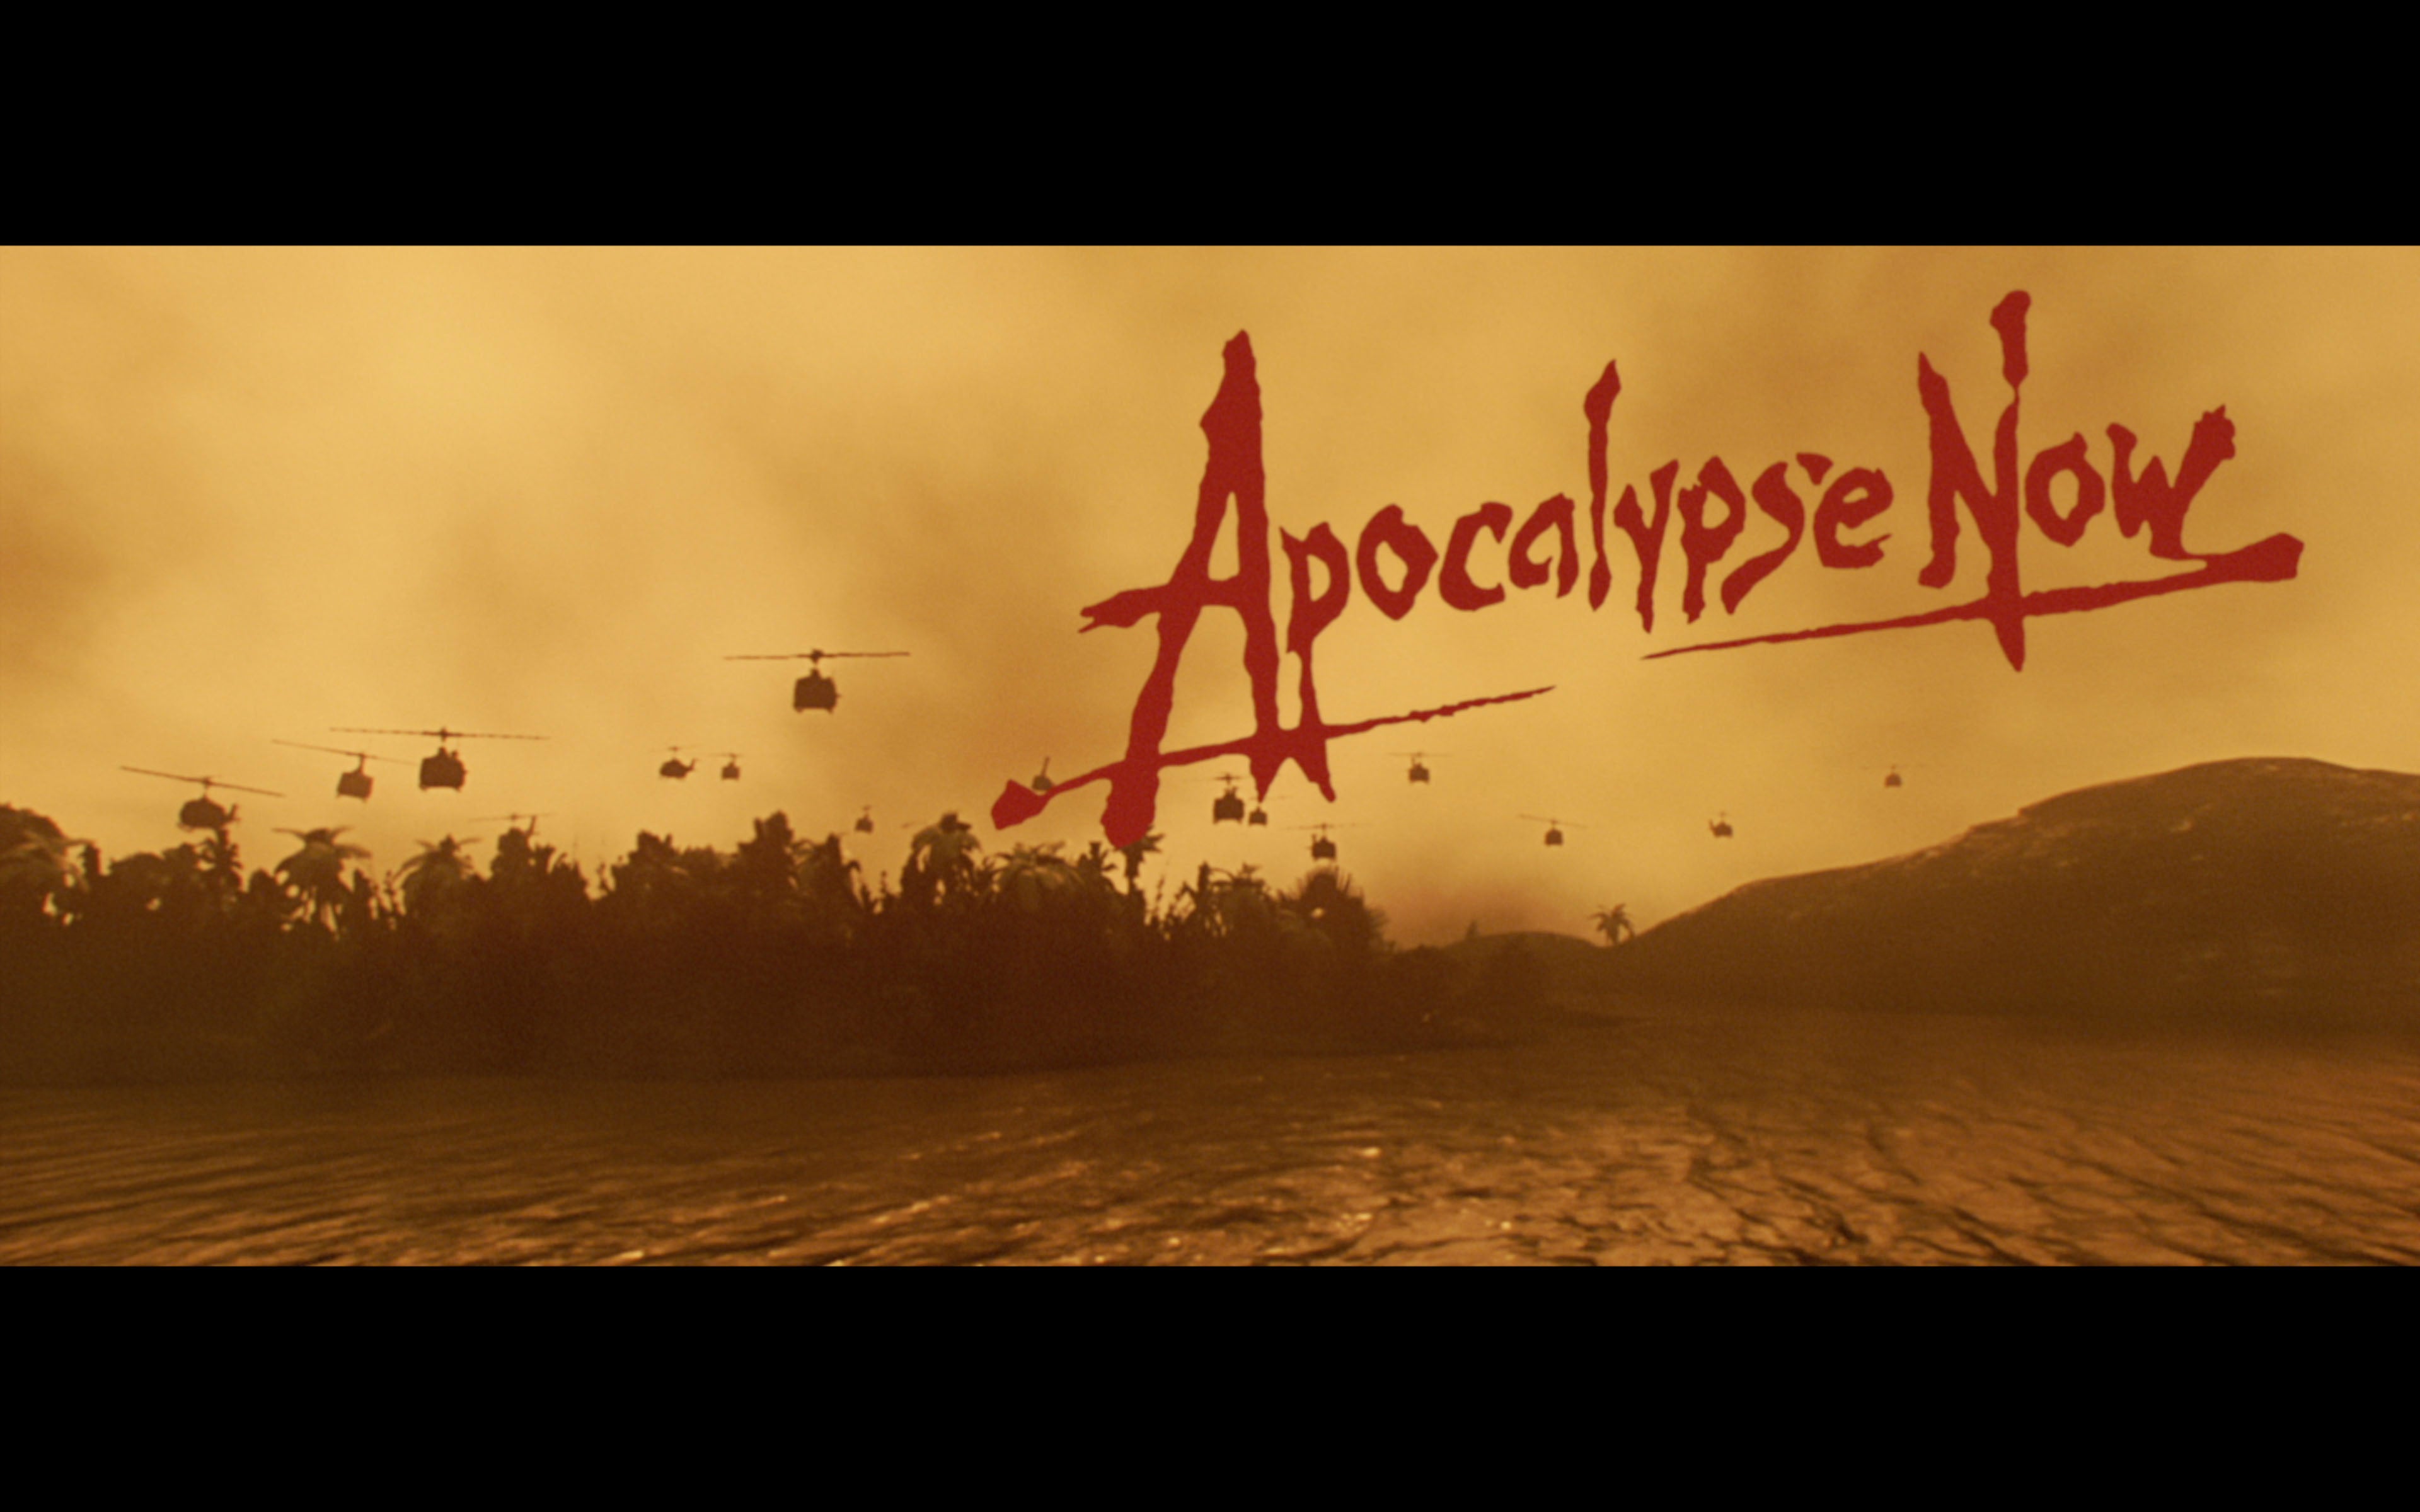 Image for The Apocalypse Now game moves from Kickstarter to its own dedicated fundraising site